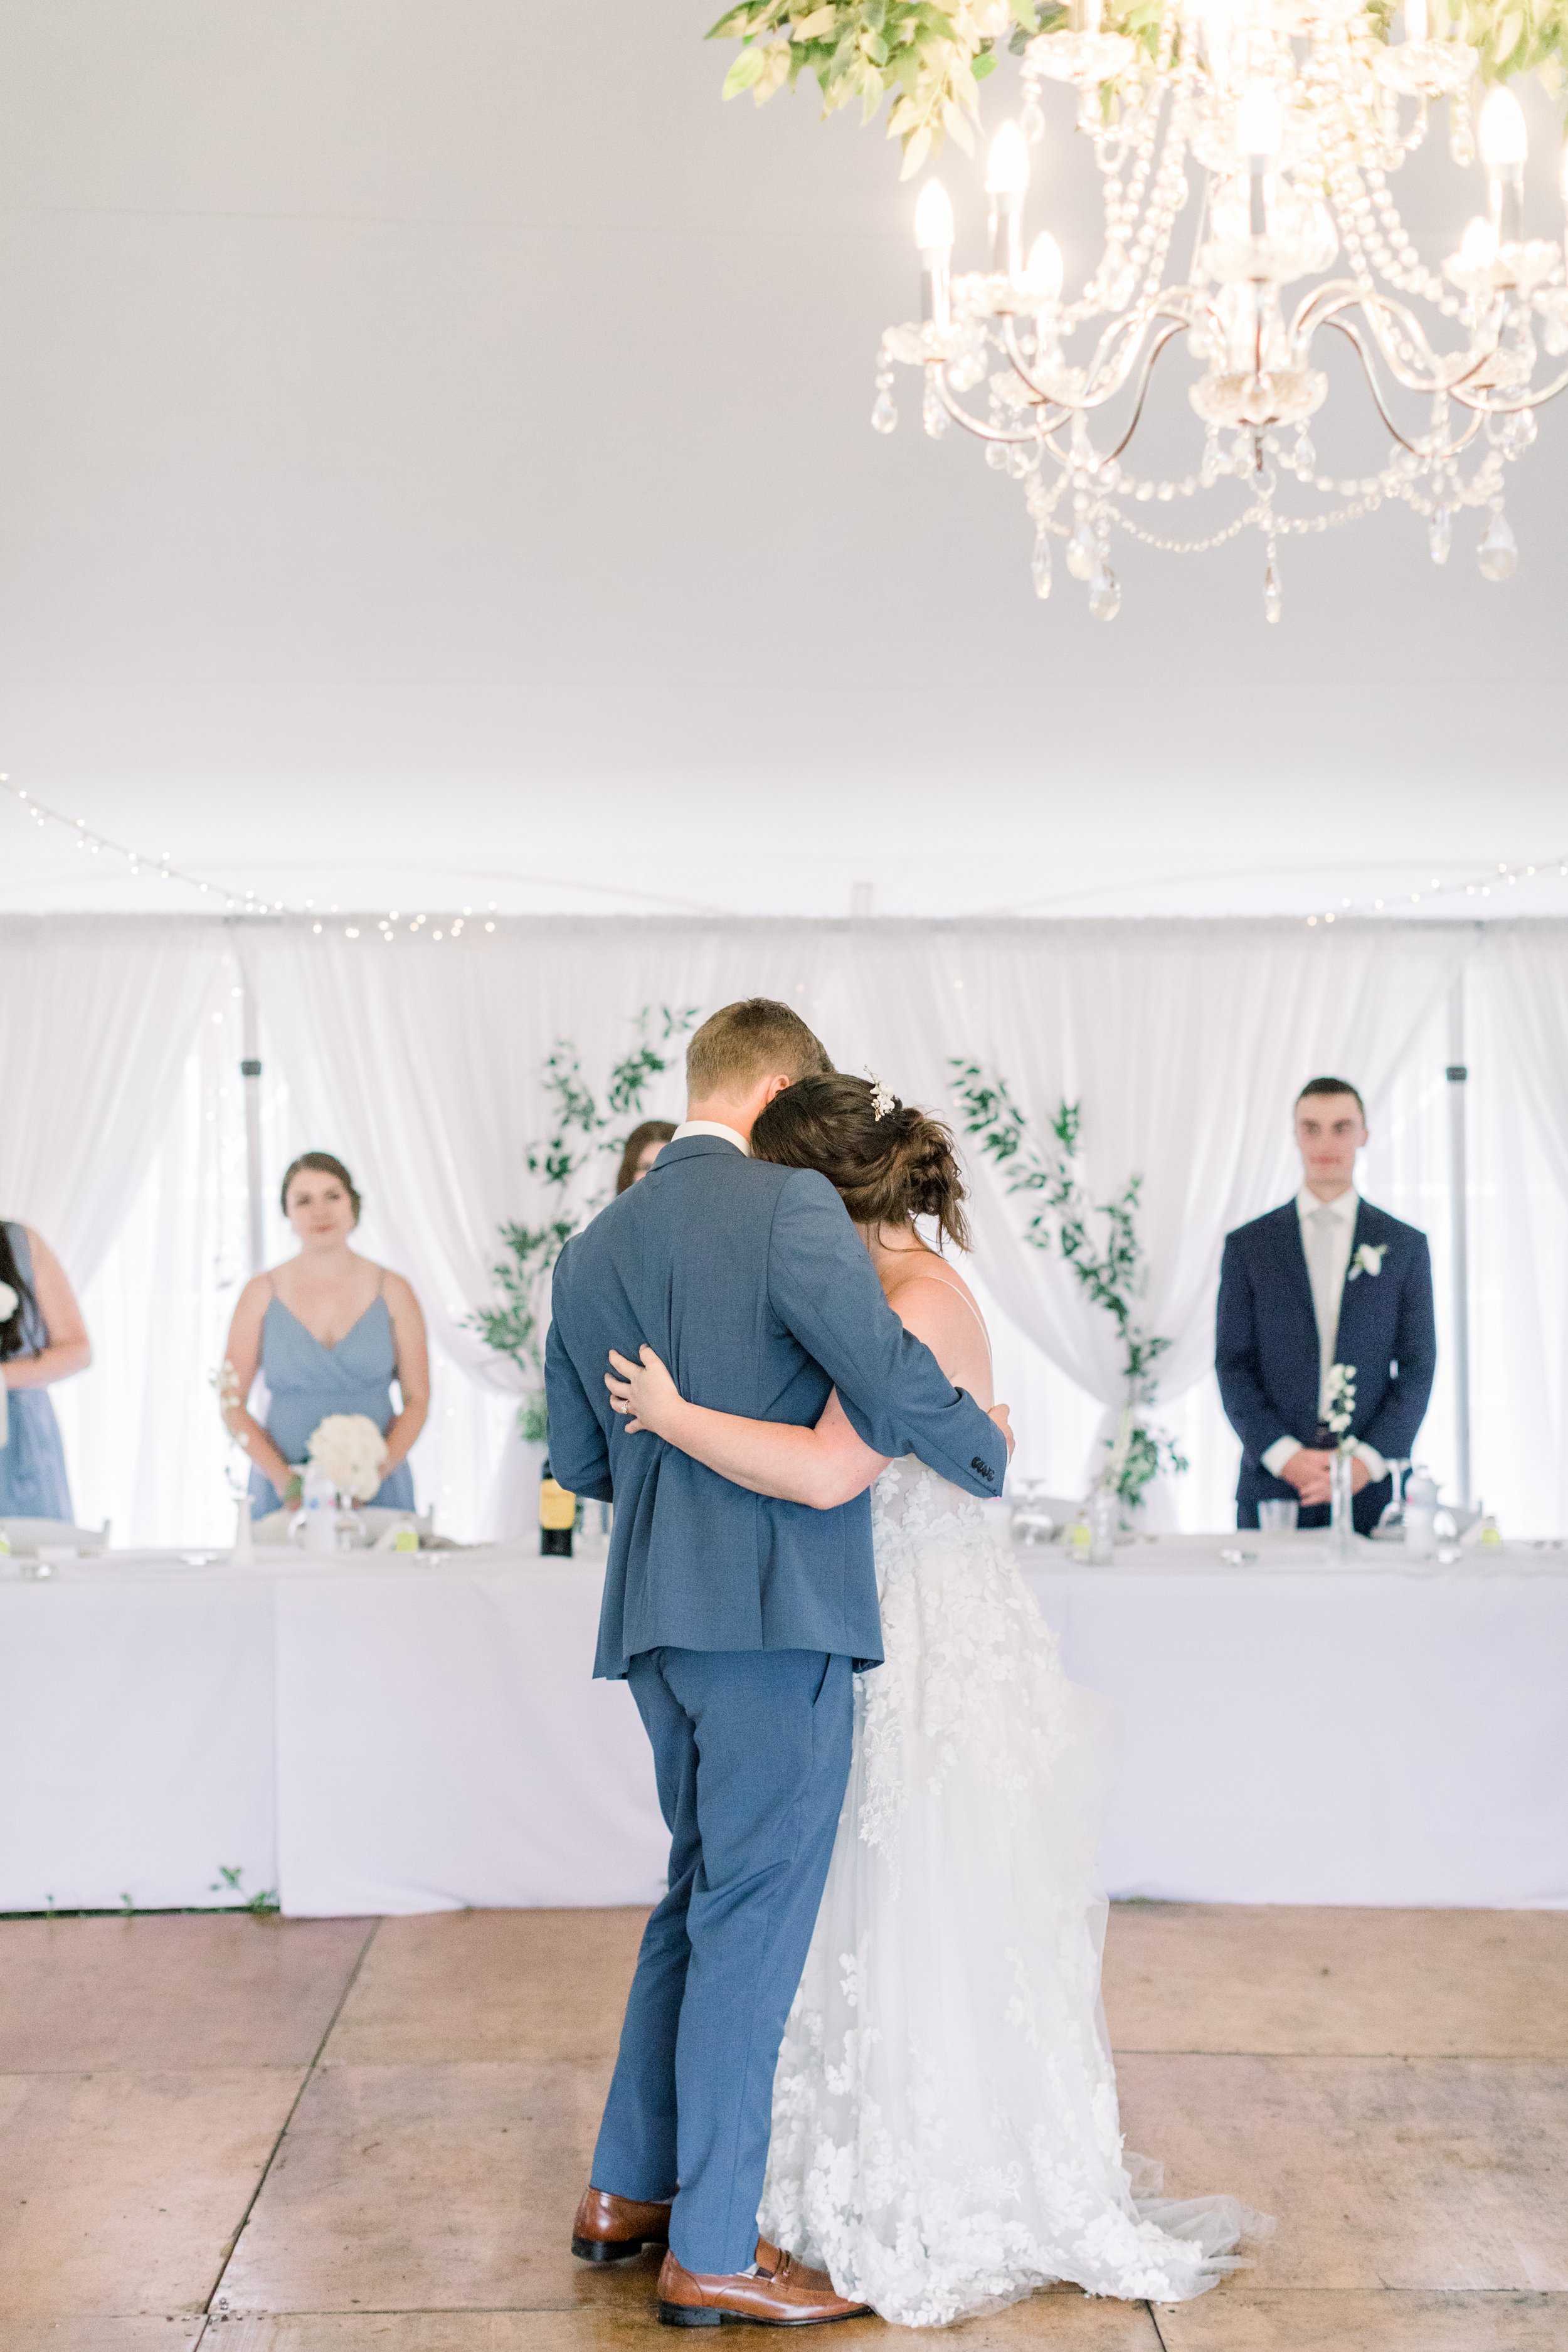  First dance with newlyweds under an outdoor wedding tent in Boulter by Chelsea Mason Photography. first dance tent wedding Boulter #chelseamasonphotography #chelseamasonweddings #Ontarioweddings #Boulterweddingphotographer #laceweddinggown 